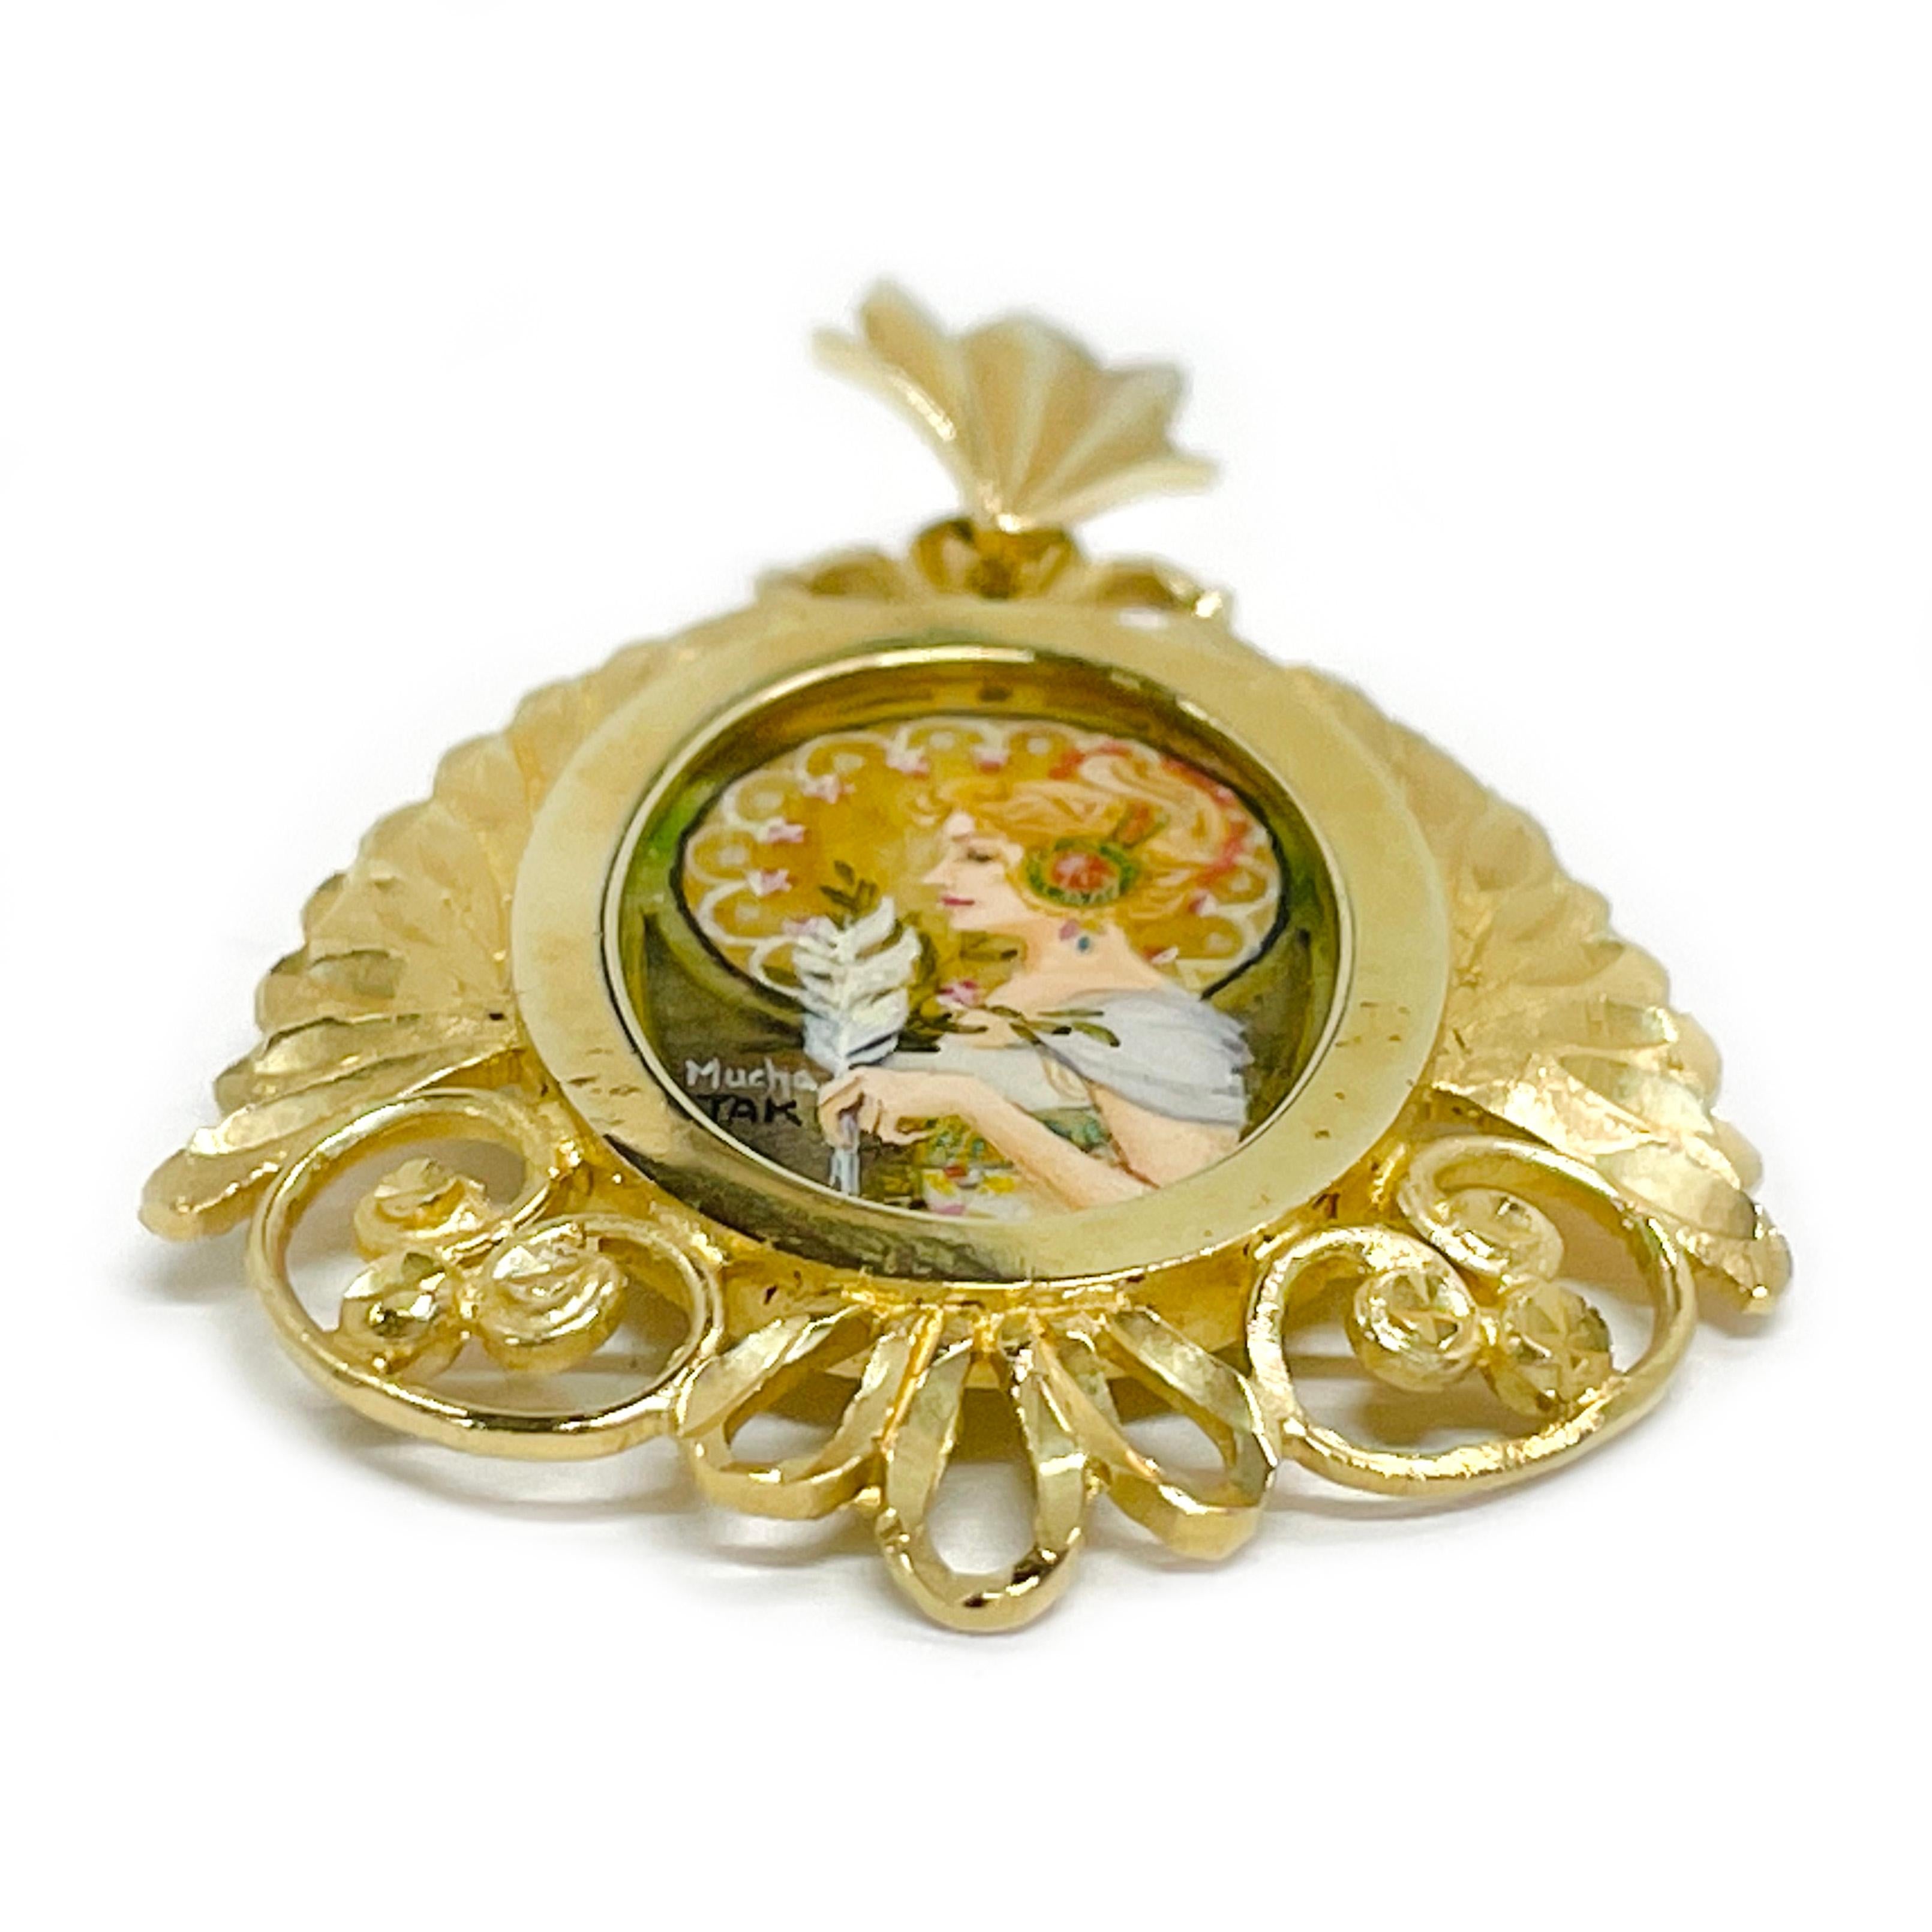 14 Karat Yellow Gold 'Feather' Hand Painted Mother of Pearl Pendant. Absolutely lovely recreated Alphonse Mucha's 'Feather' painting. The miniature painting is set in a 14 karat gold ornate oval frame with diamond-cut details. The painting is signed